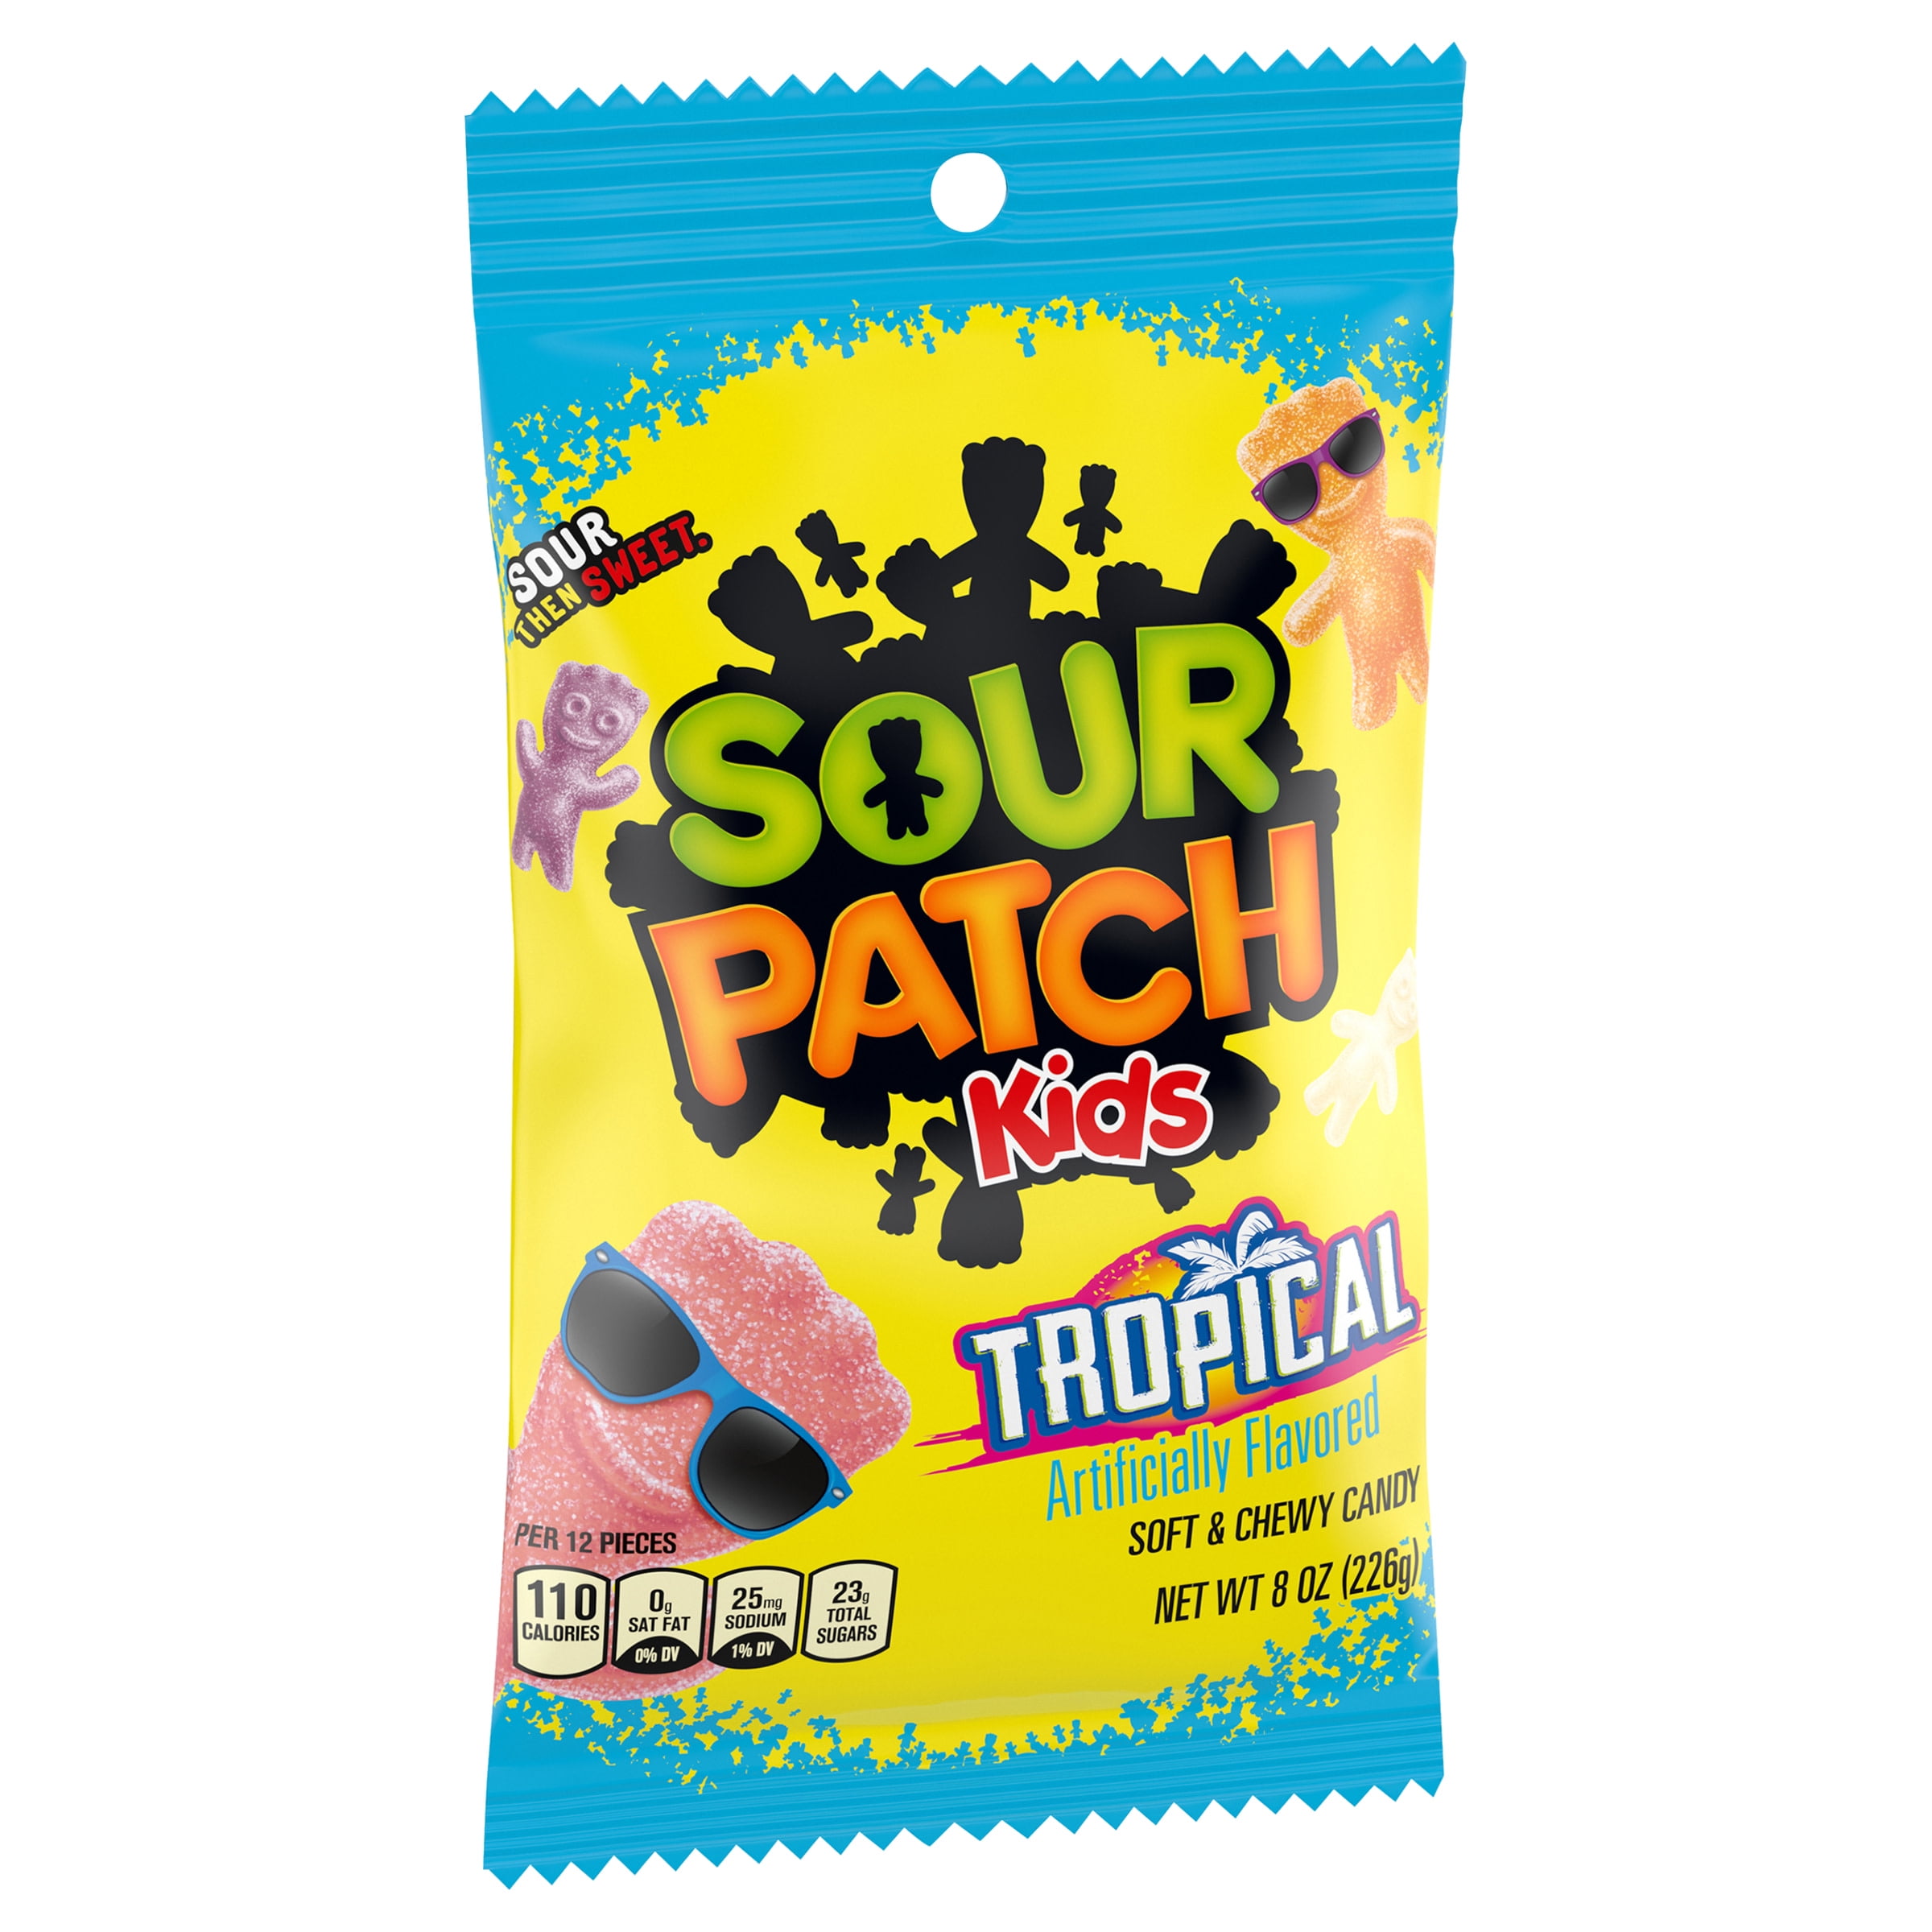 SOUR PATCH KIDS Tropical Soft & Chewy Candy, 8 oz Bag